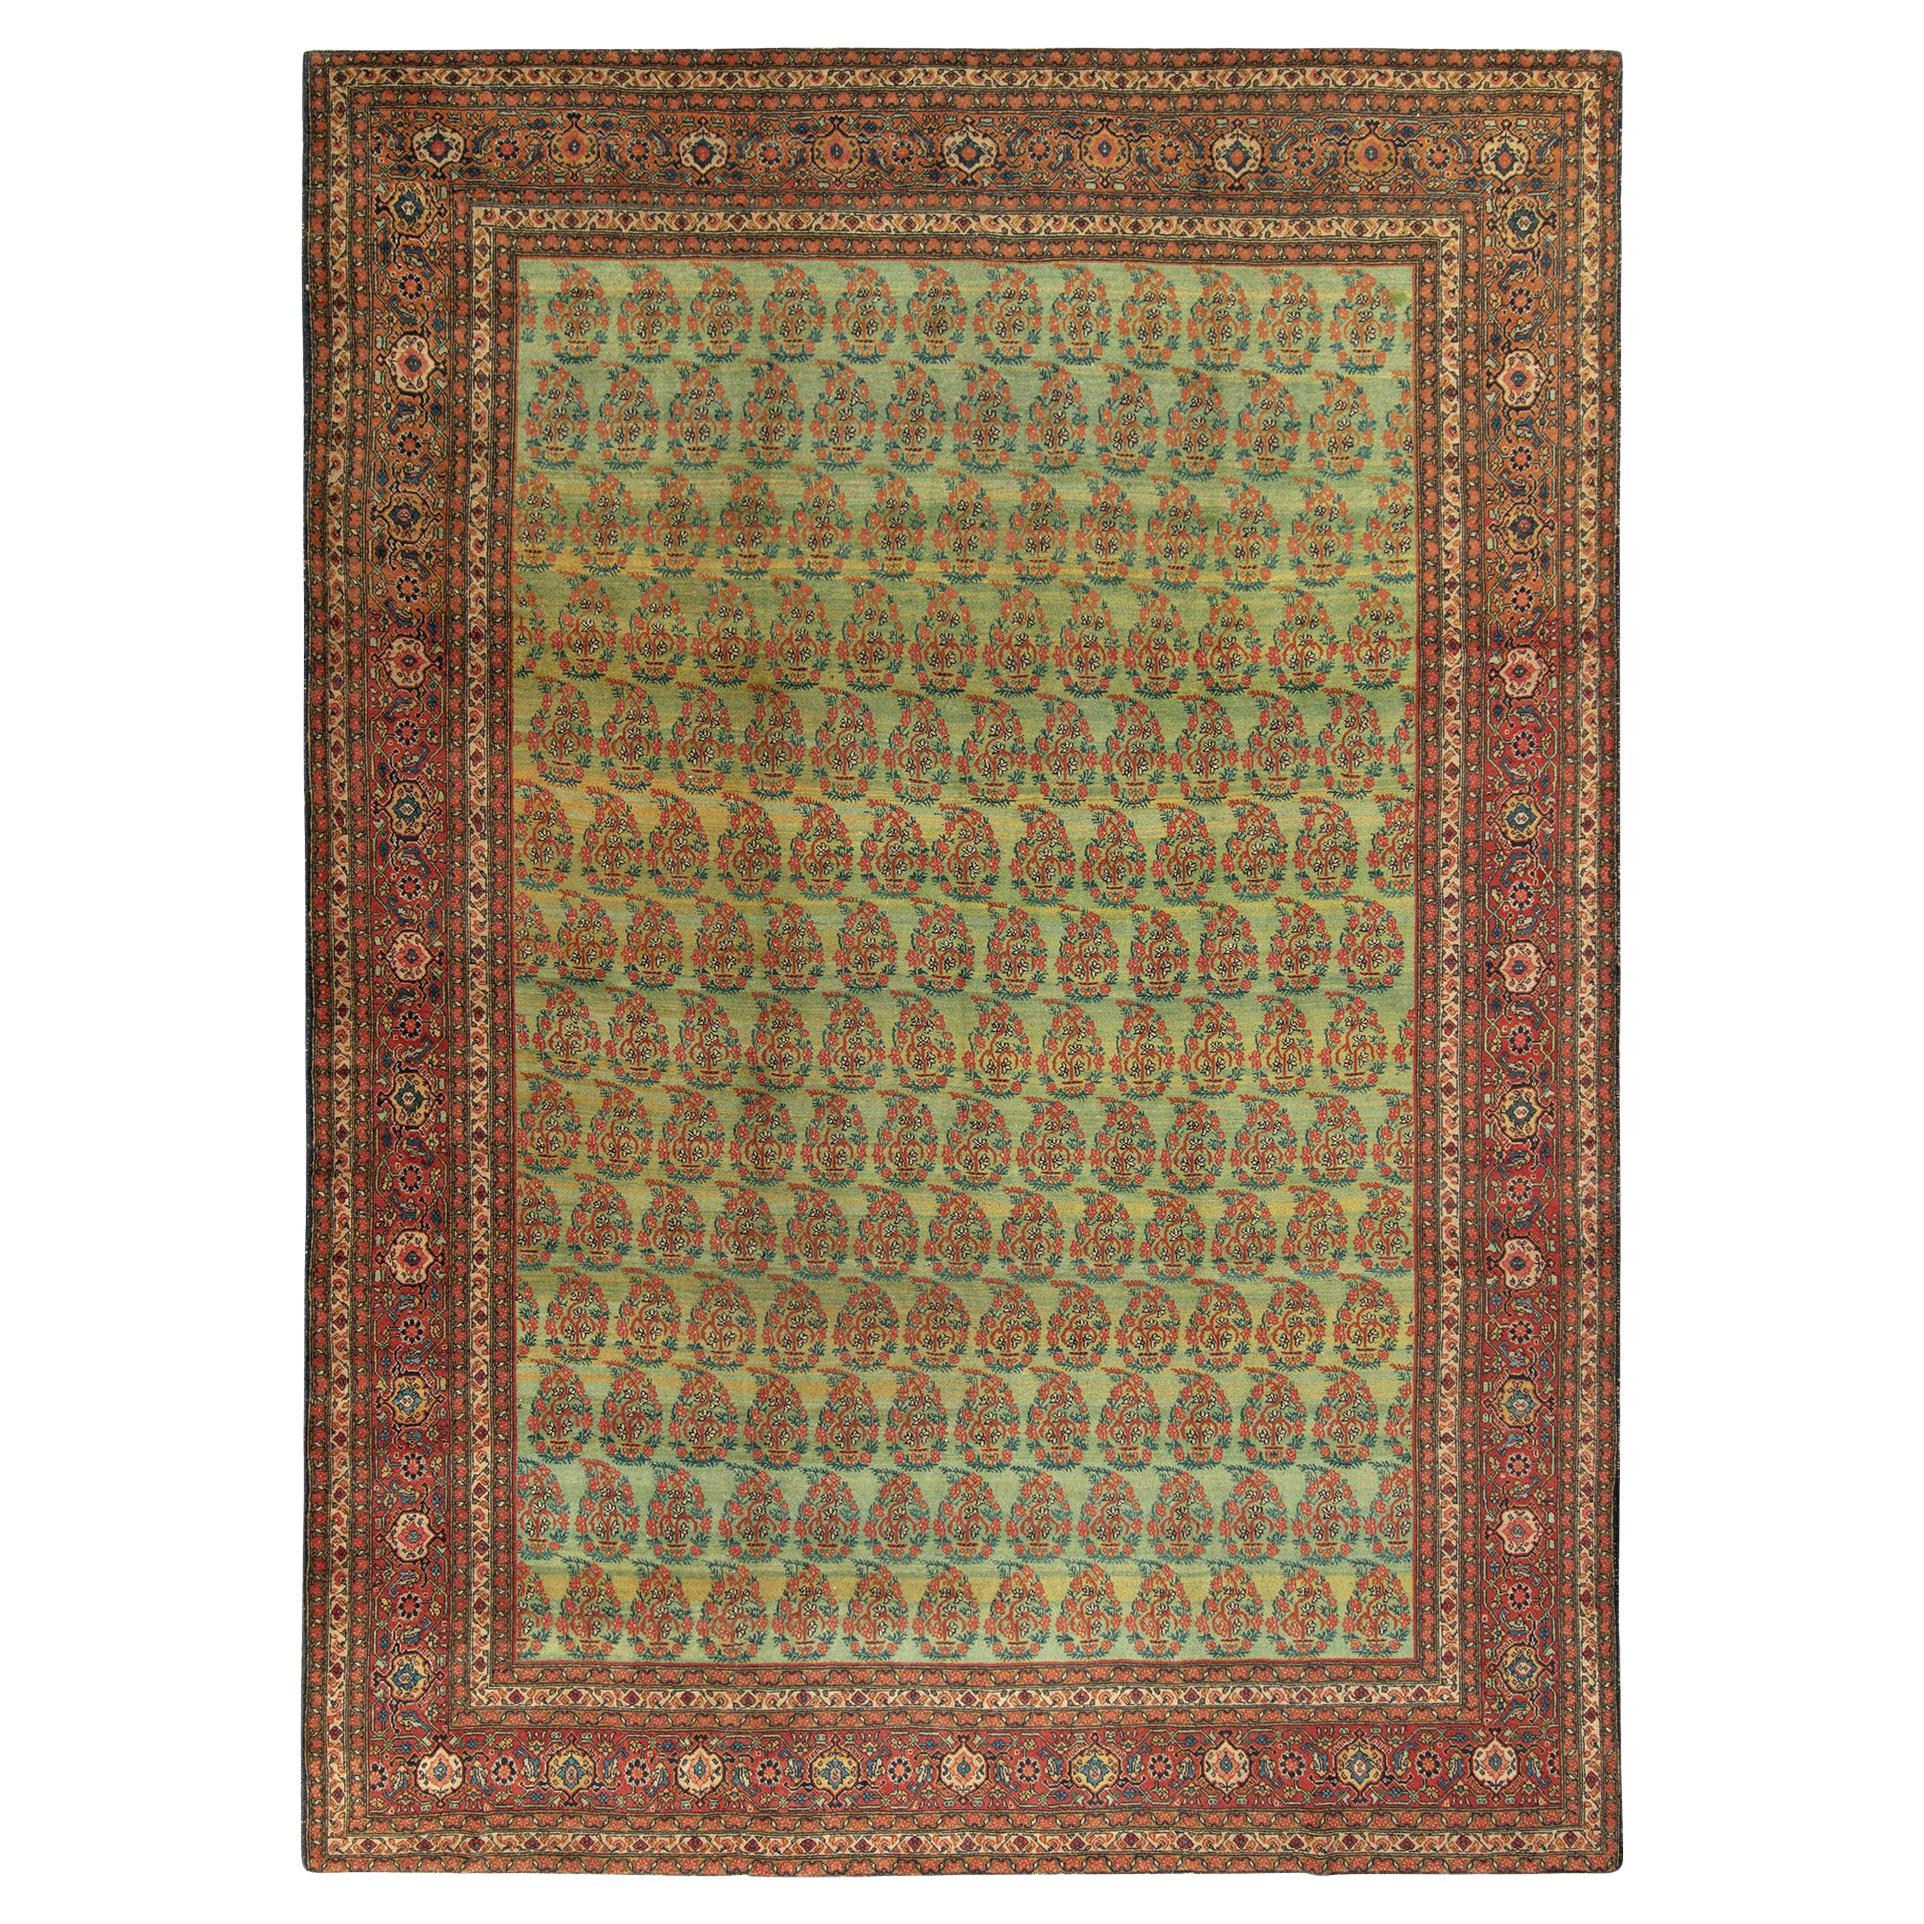 Antique Tabriz Persian Rug in an All over Green, Red Floral Pattern For Sale